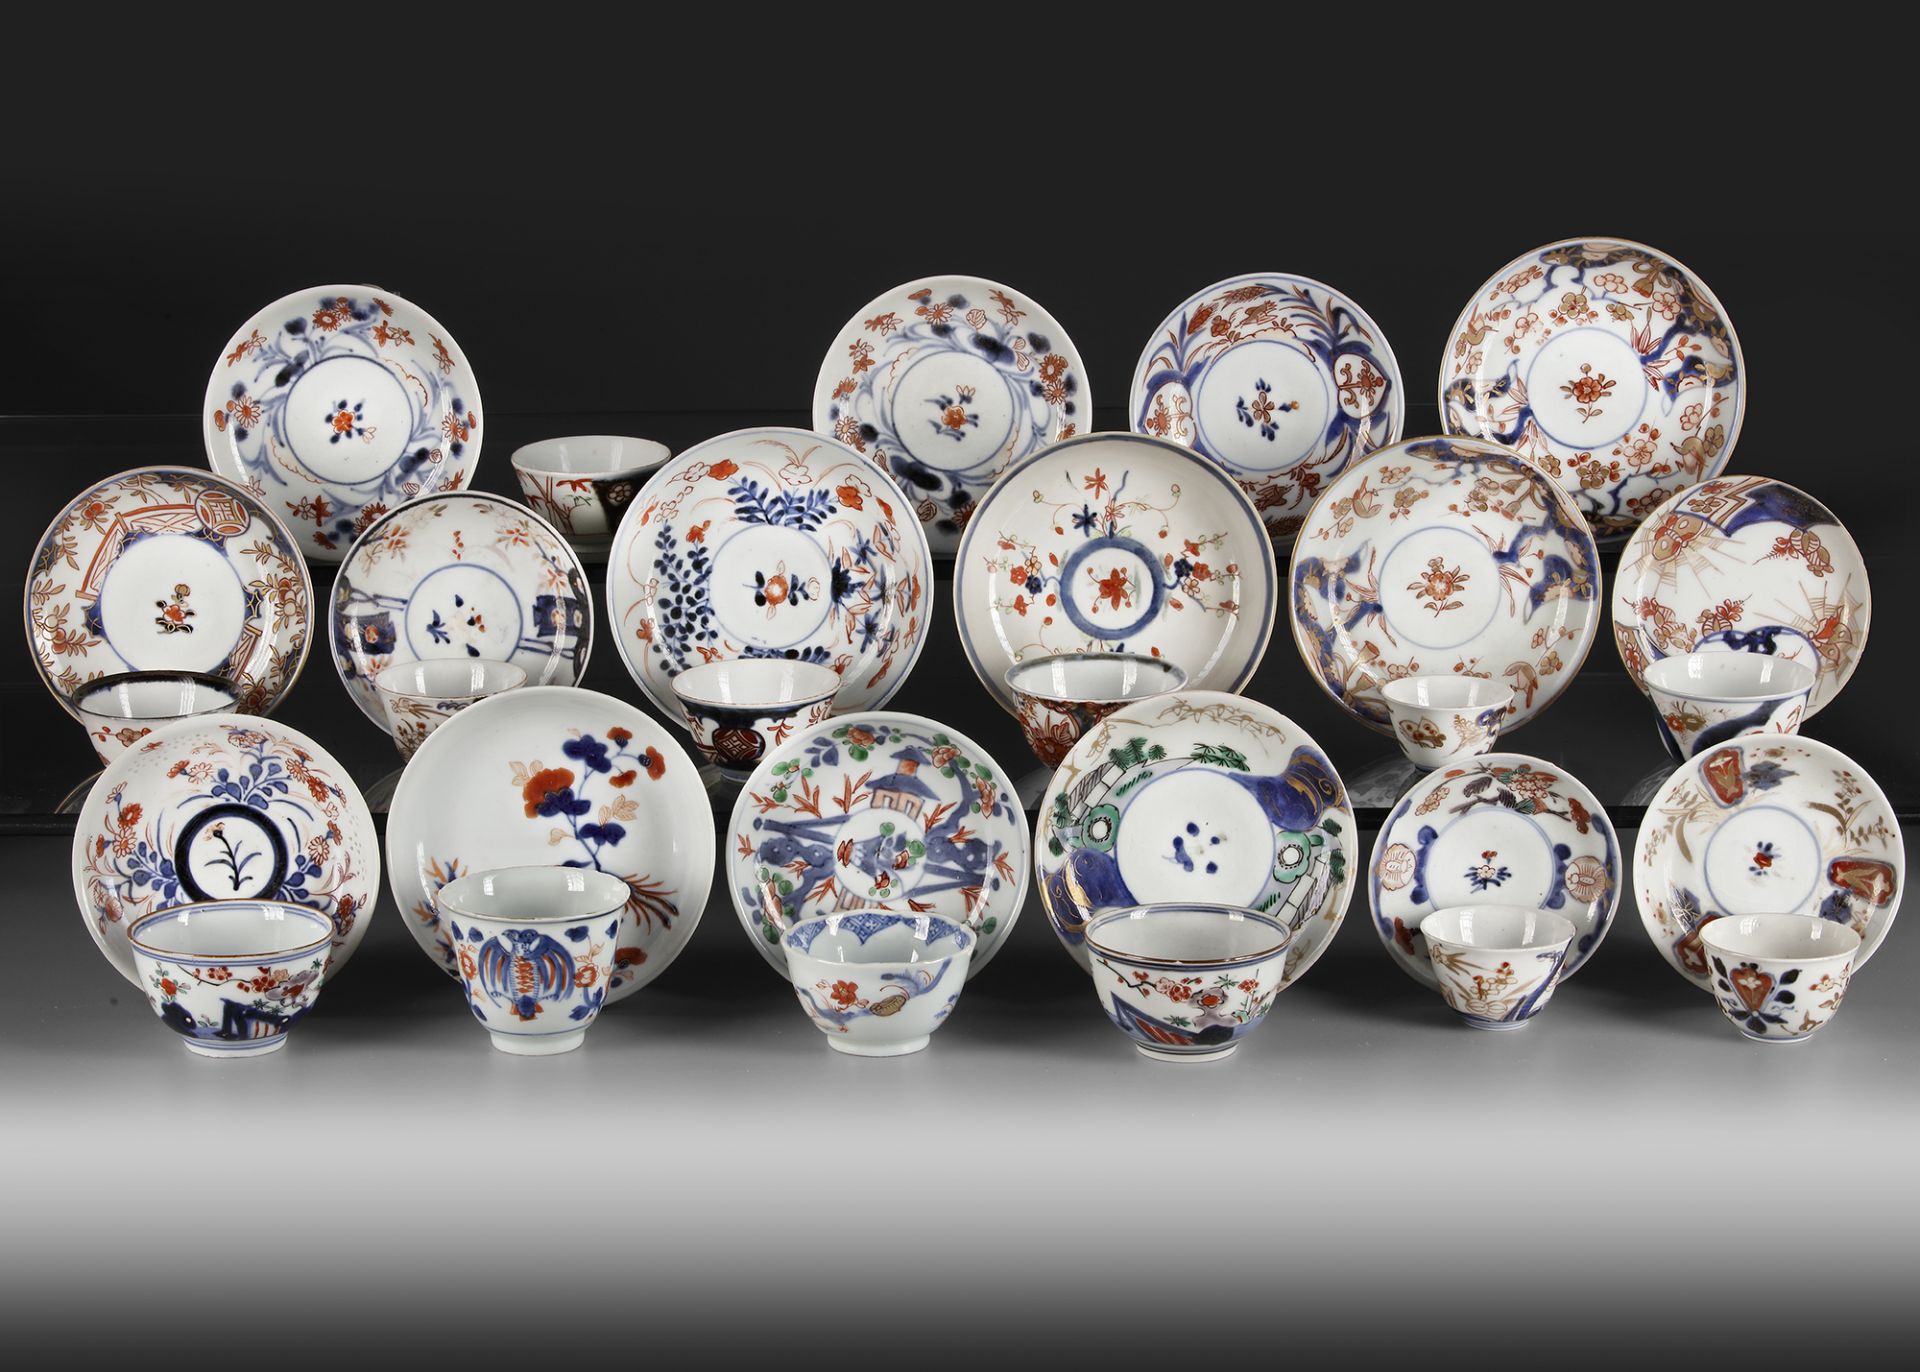 A CHINESE COLLECTION OF IMARI 13 CUPS AND 16 SAUCERS, 18TH CENTURY